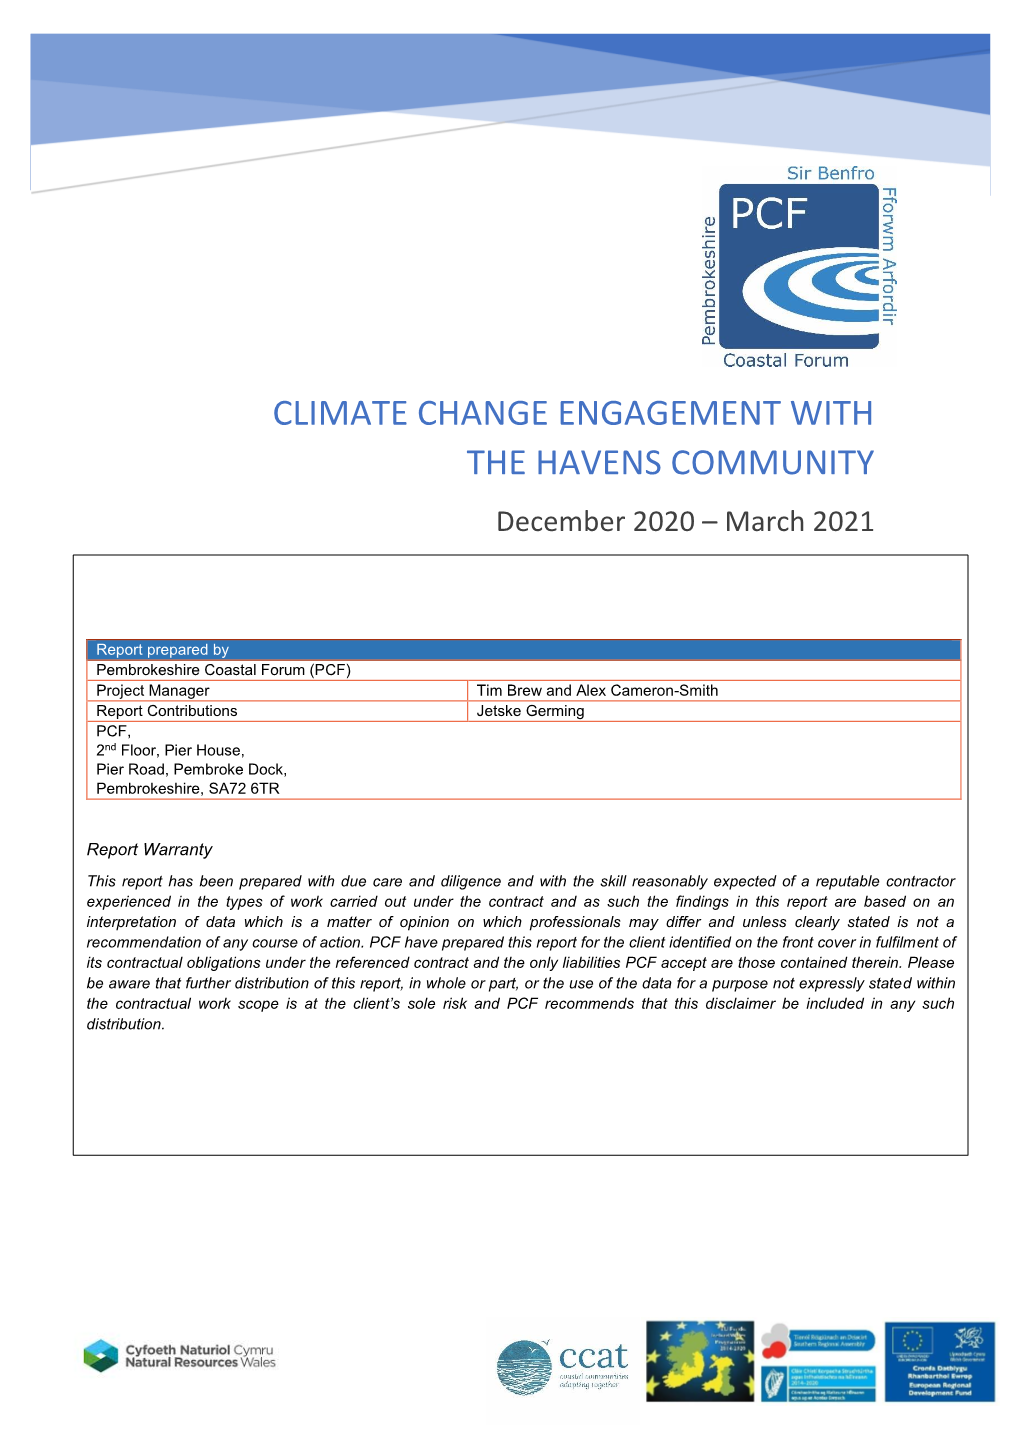 CLIMATE CHANGE ENGAGEMENT with the HAVENS COMMUNITY December 2020 – March 2021